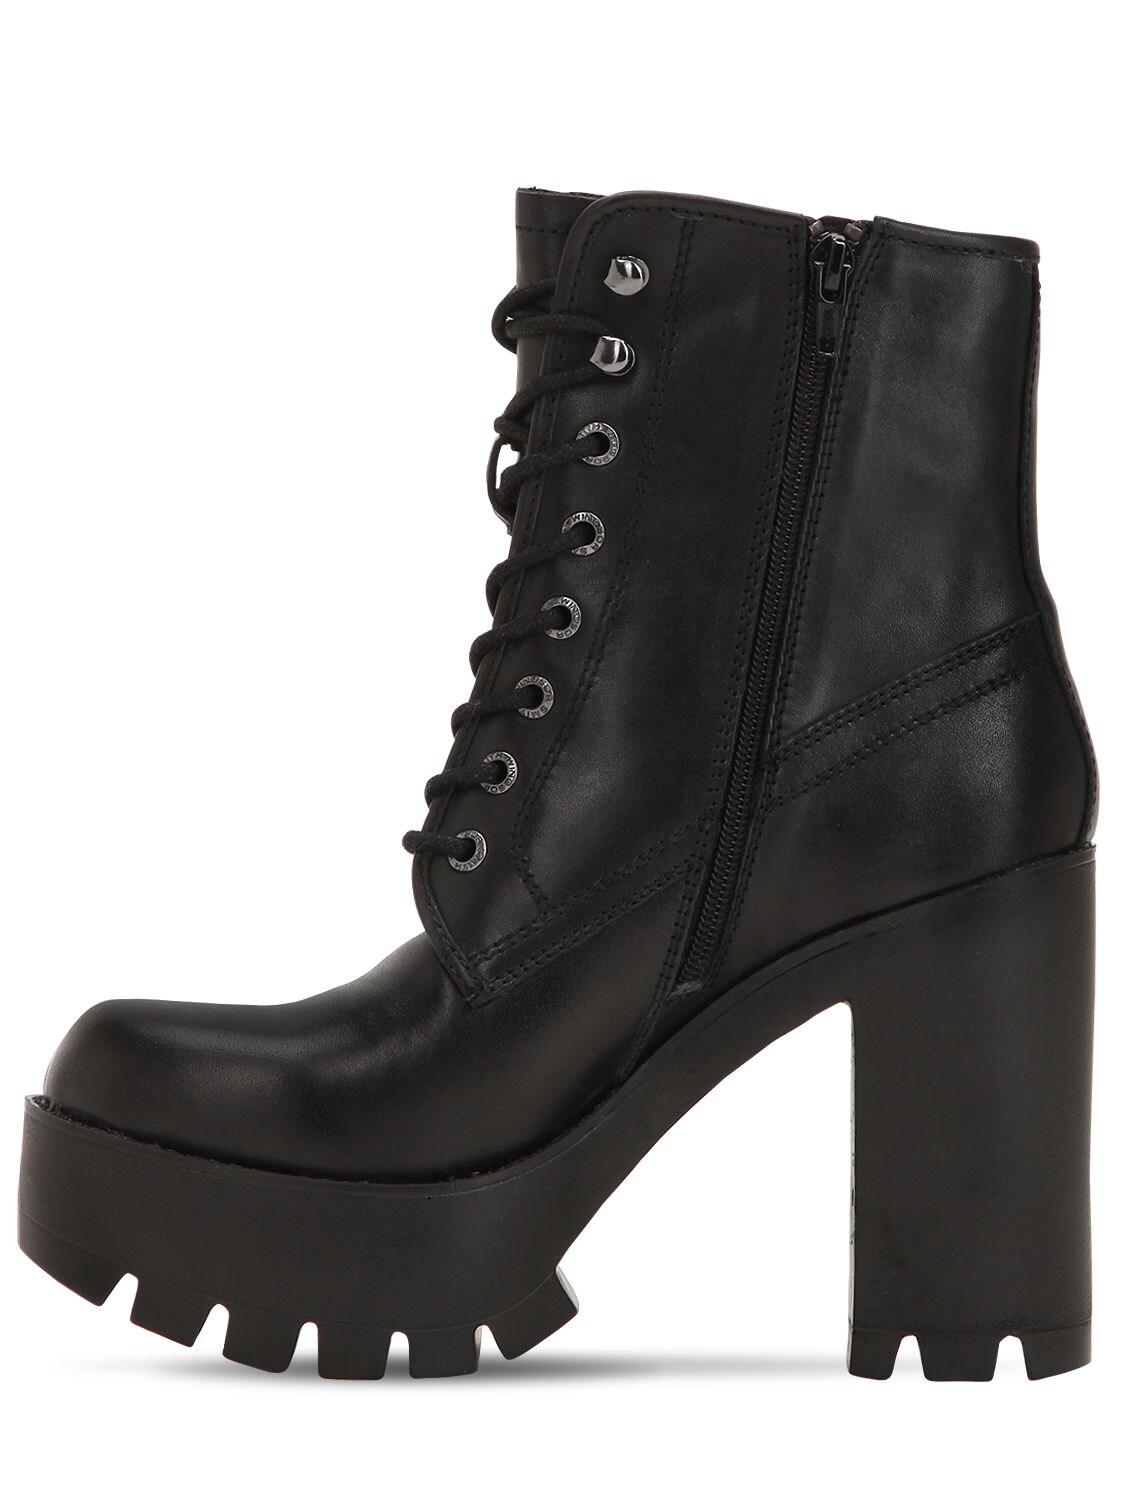 Windsor Smith 120mm Eline Leather Boots in Black - Lyst